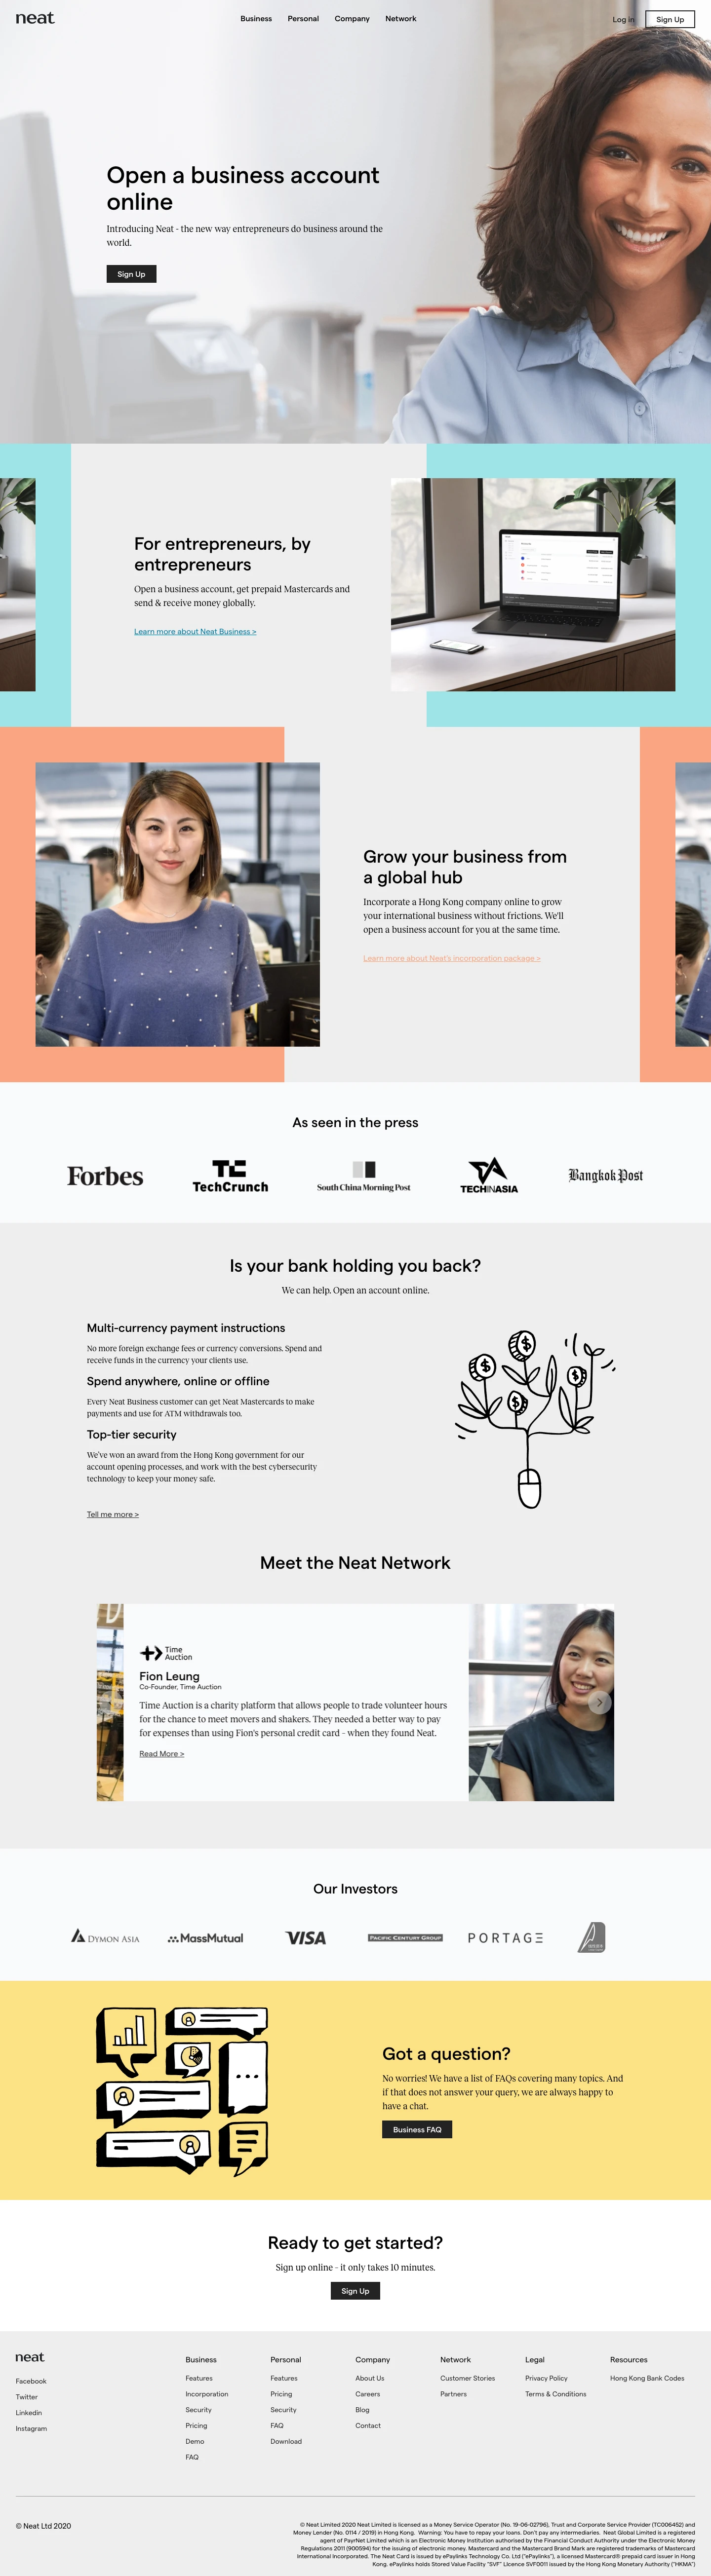 Neat Landing Page Example: Neat believes in making international business a reality for entrepreneurs around the world. Today, Neat is a modern alternative to a bank, designed to support you wherever you go. Tomorrow, we’re a platform for doing business: building a dynamic and frictionless economy.